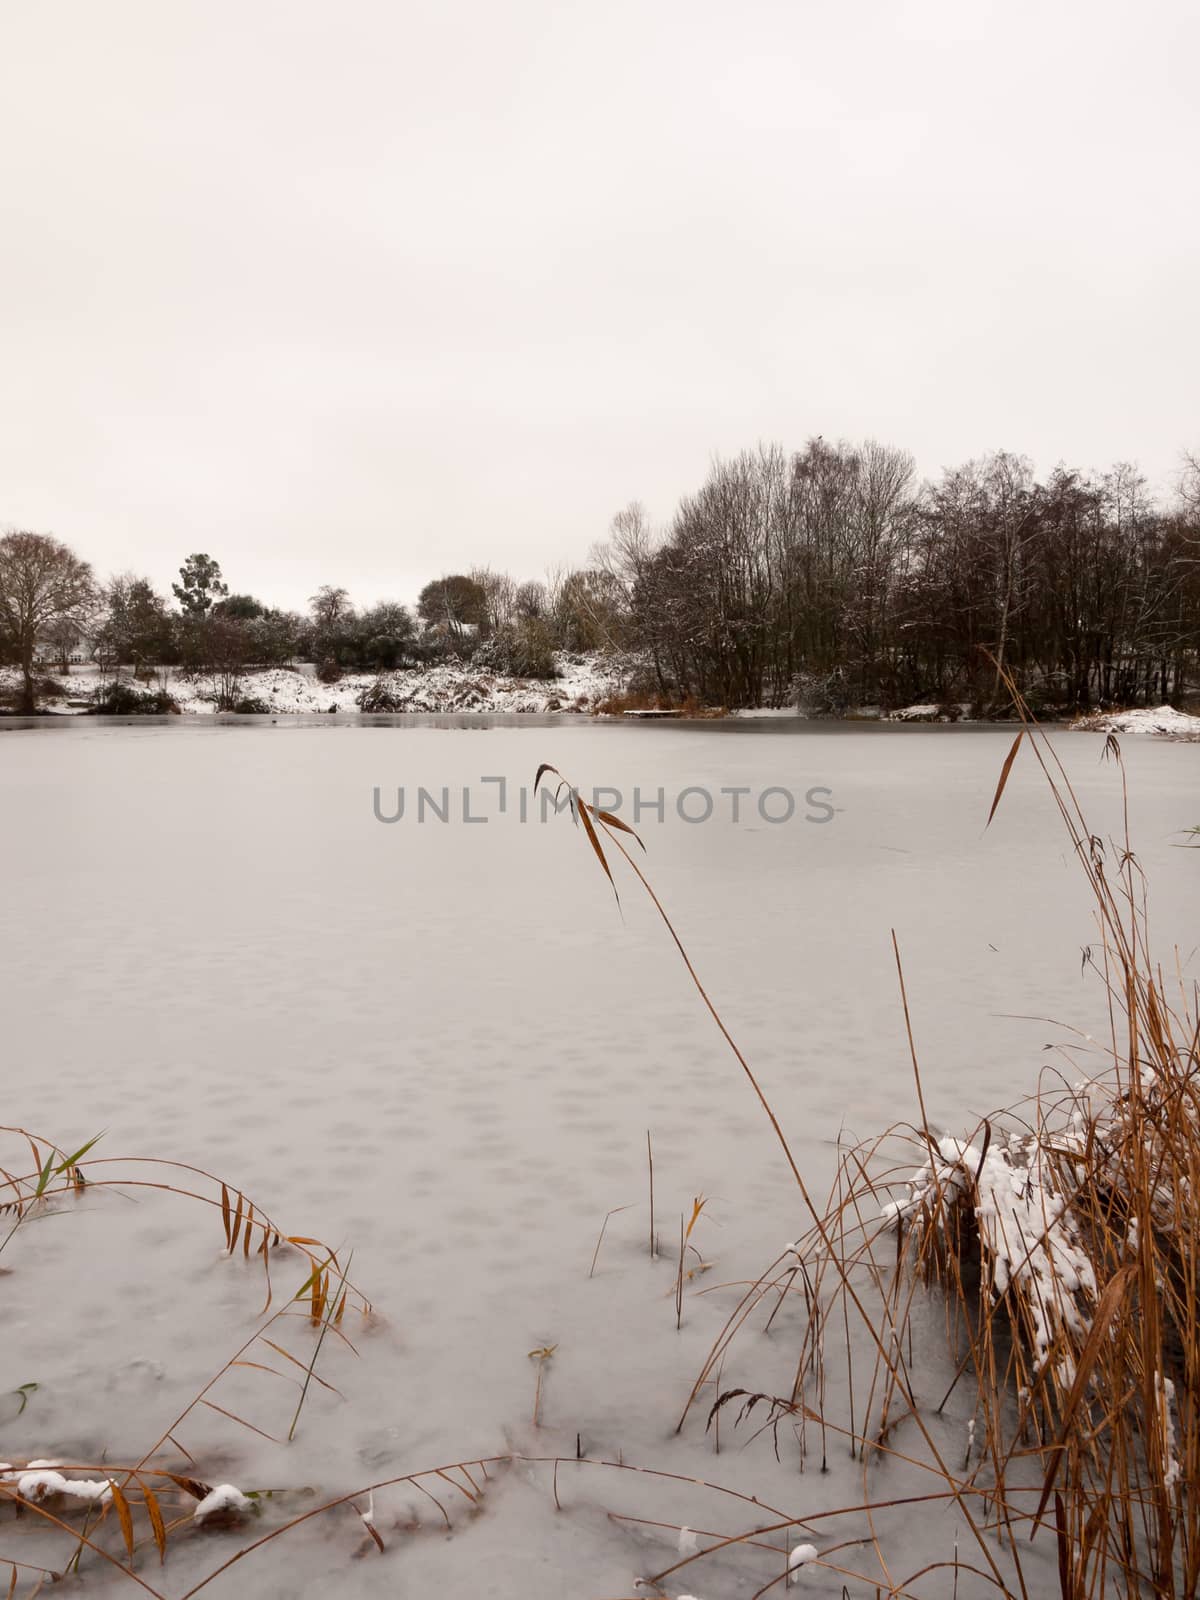 frozen over winter lake december outside country trees by callumrc